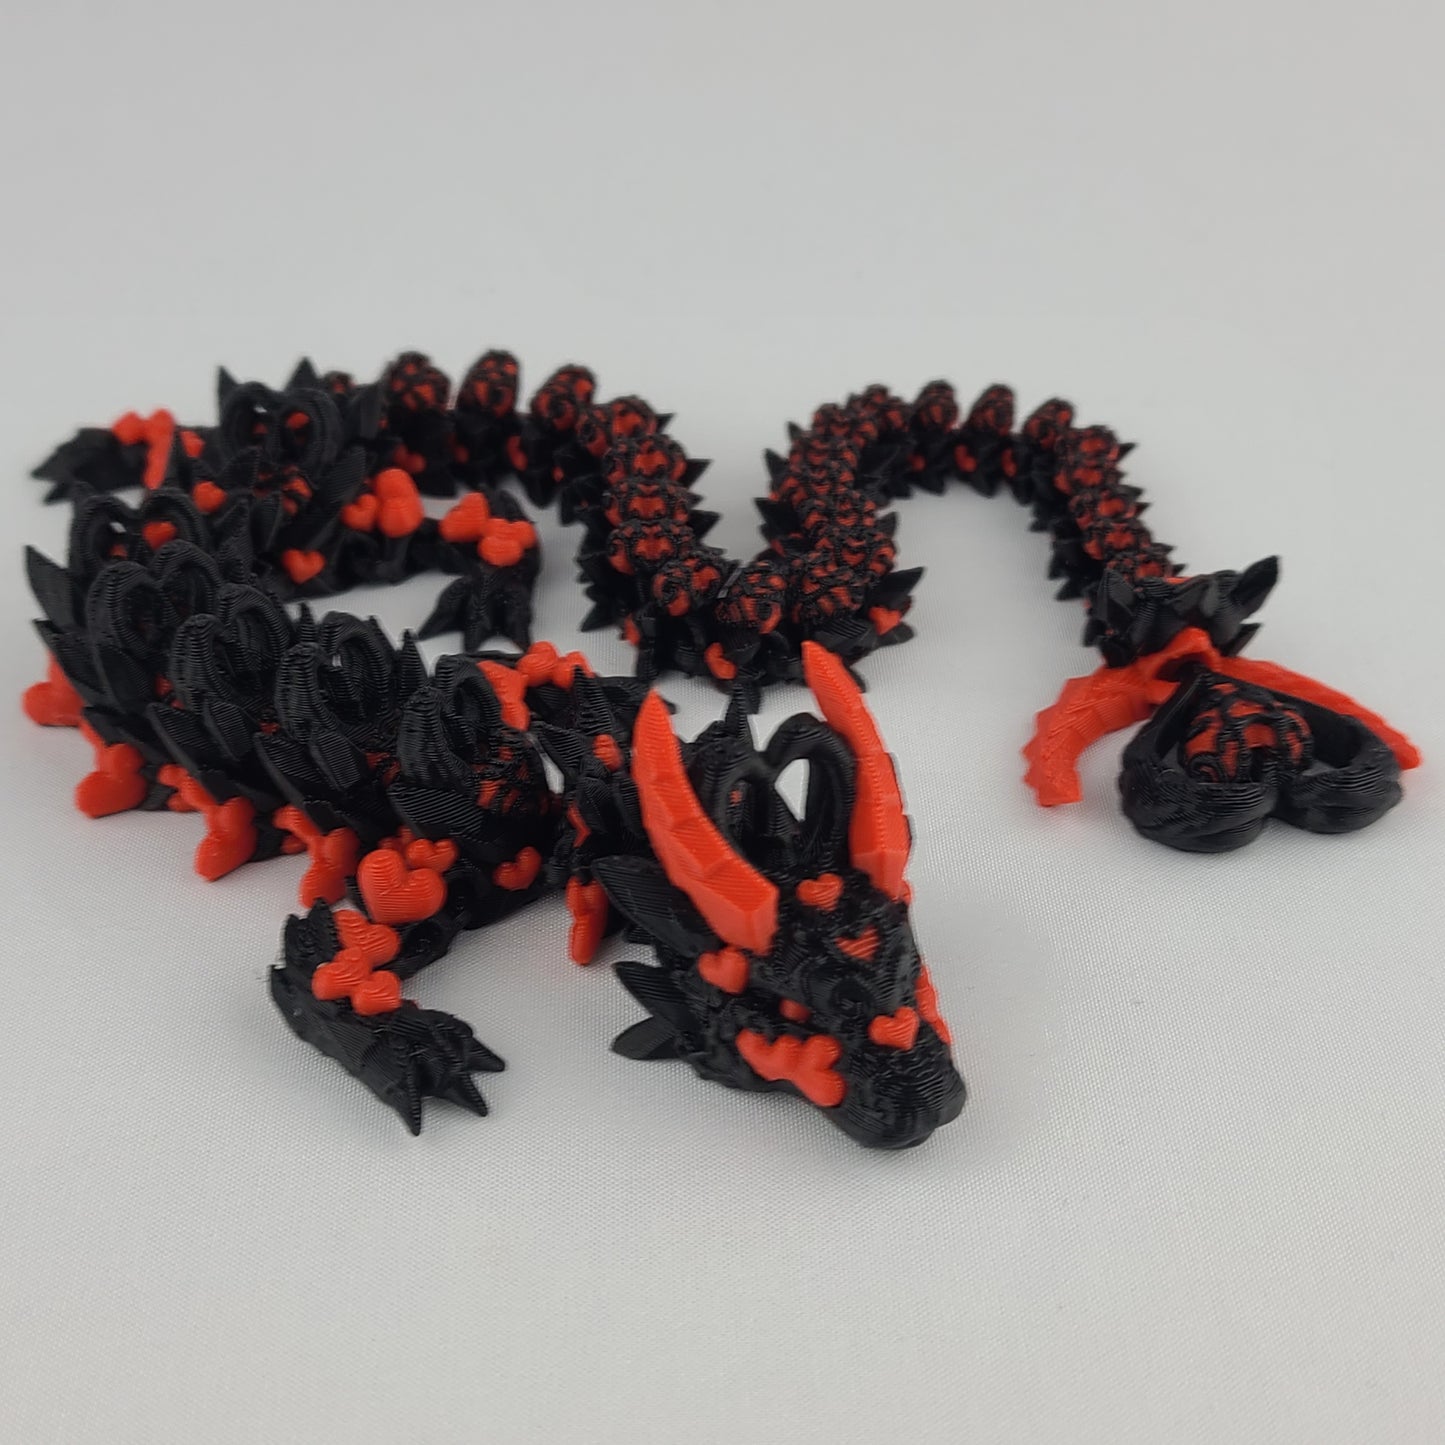 Valentines Dark Heart Dragon Articulated and 3d printed